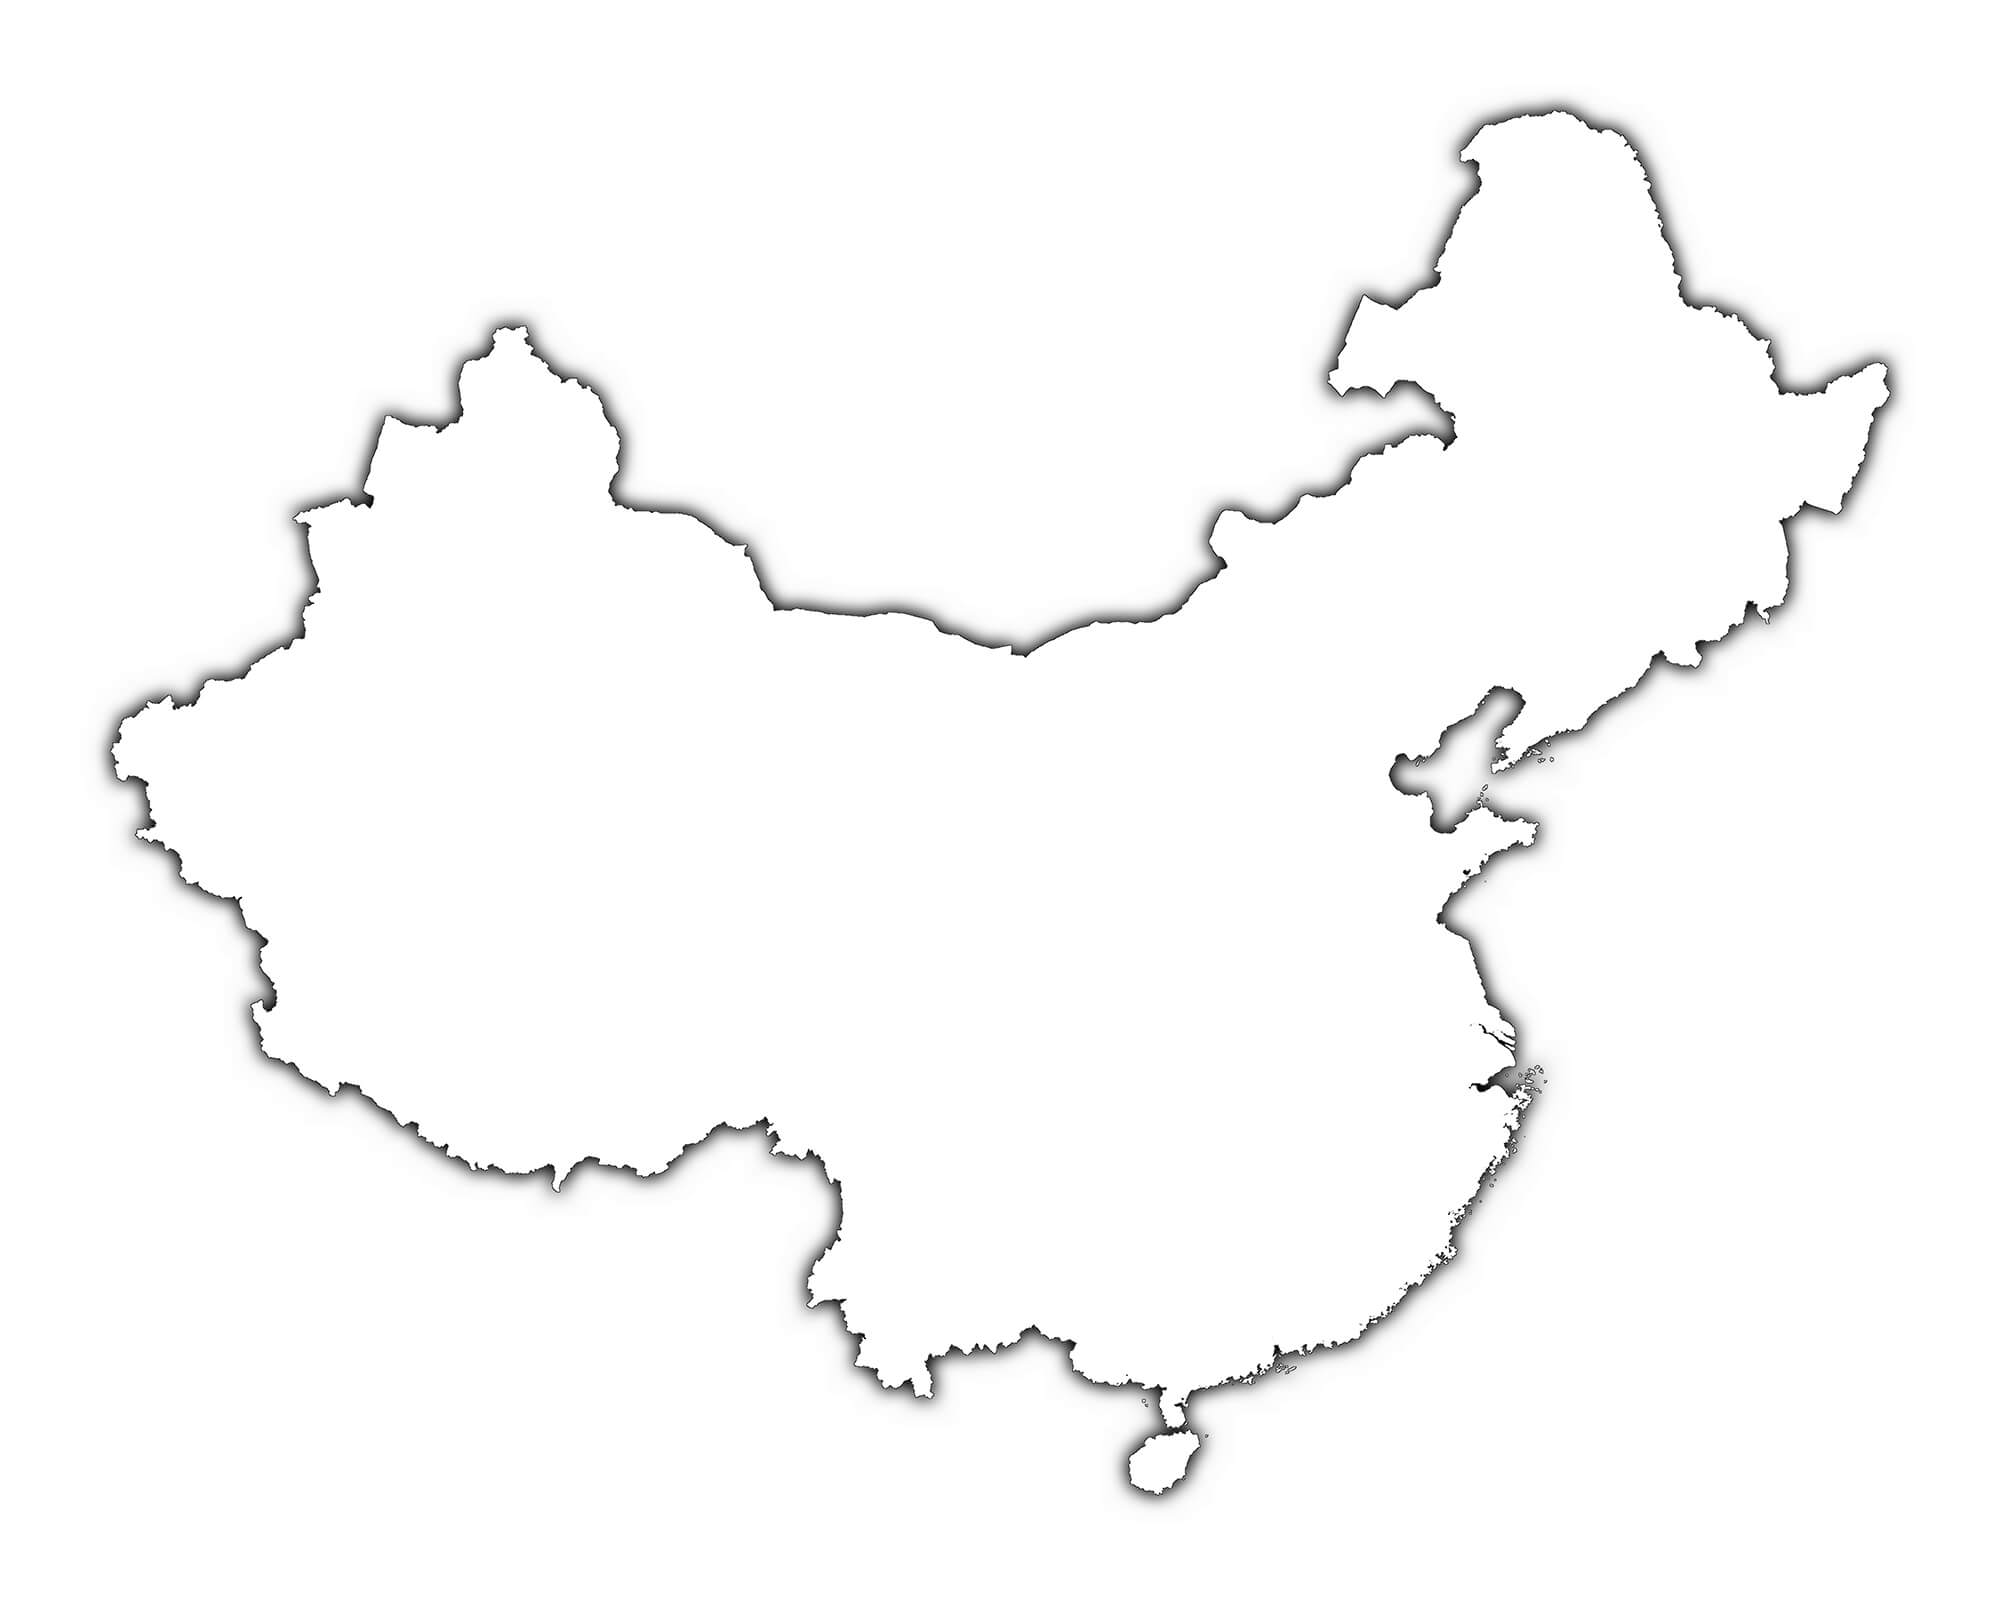 China Outline Map